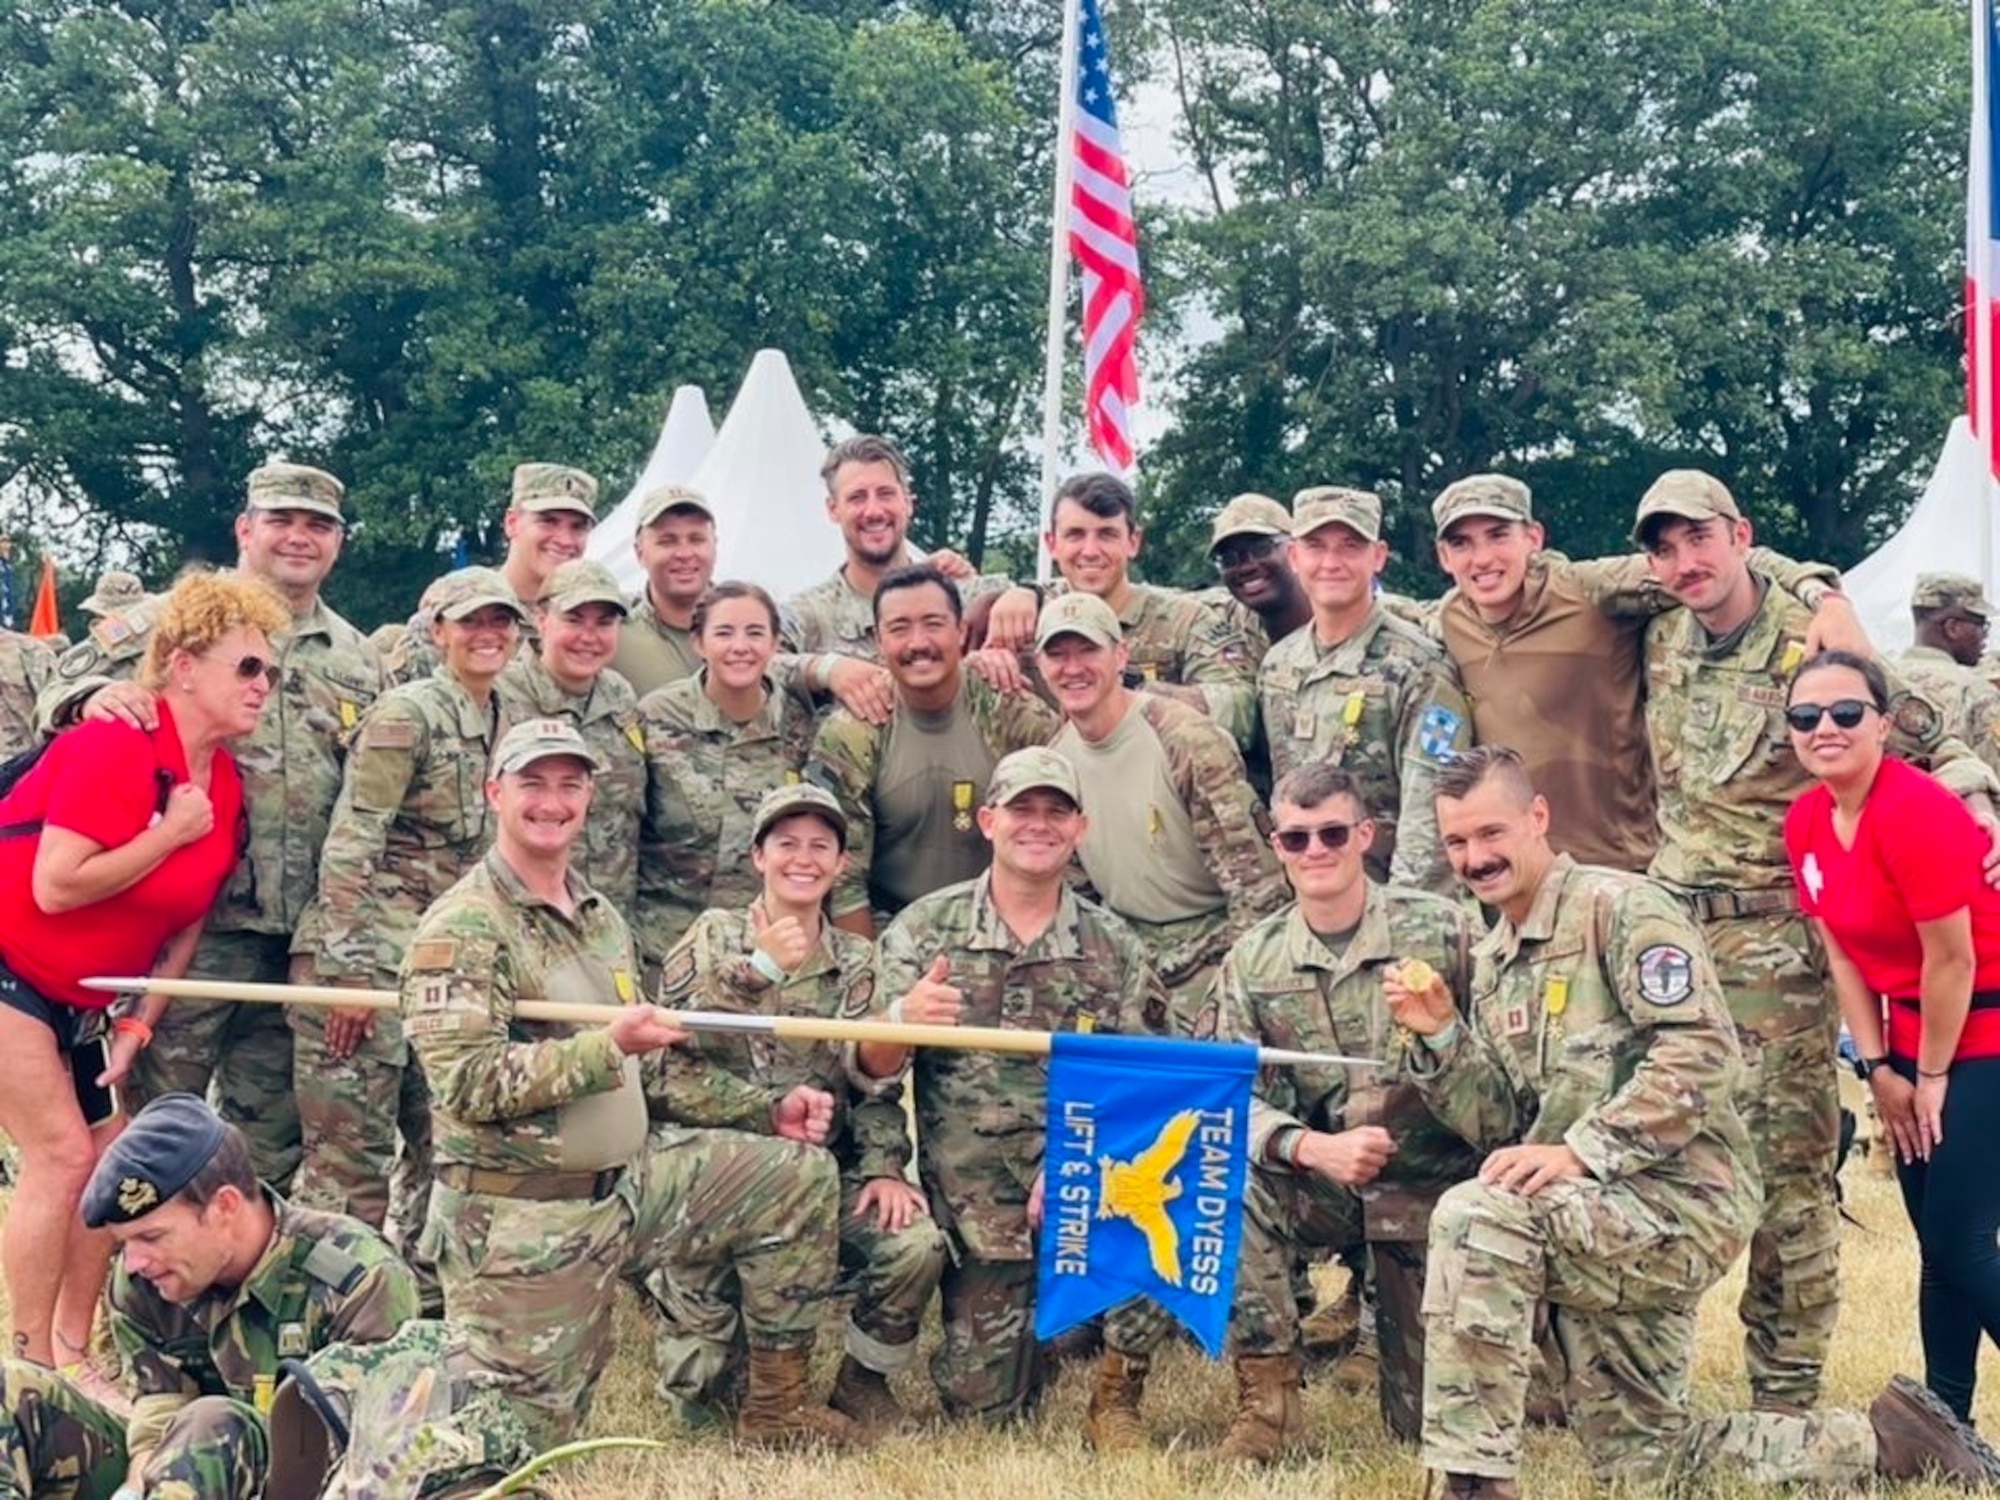 Dyess Air Force Base Rapid Airman Development Team stands with the 7th Bomb Wing Gideon July 21, 2022, after earning the 4-Daagse March Team Medal in Nijmegen, the Netherlands. (U.S.Air Force Photo By 1st Lt Kaitlin Cashin)